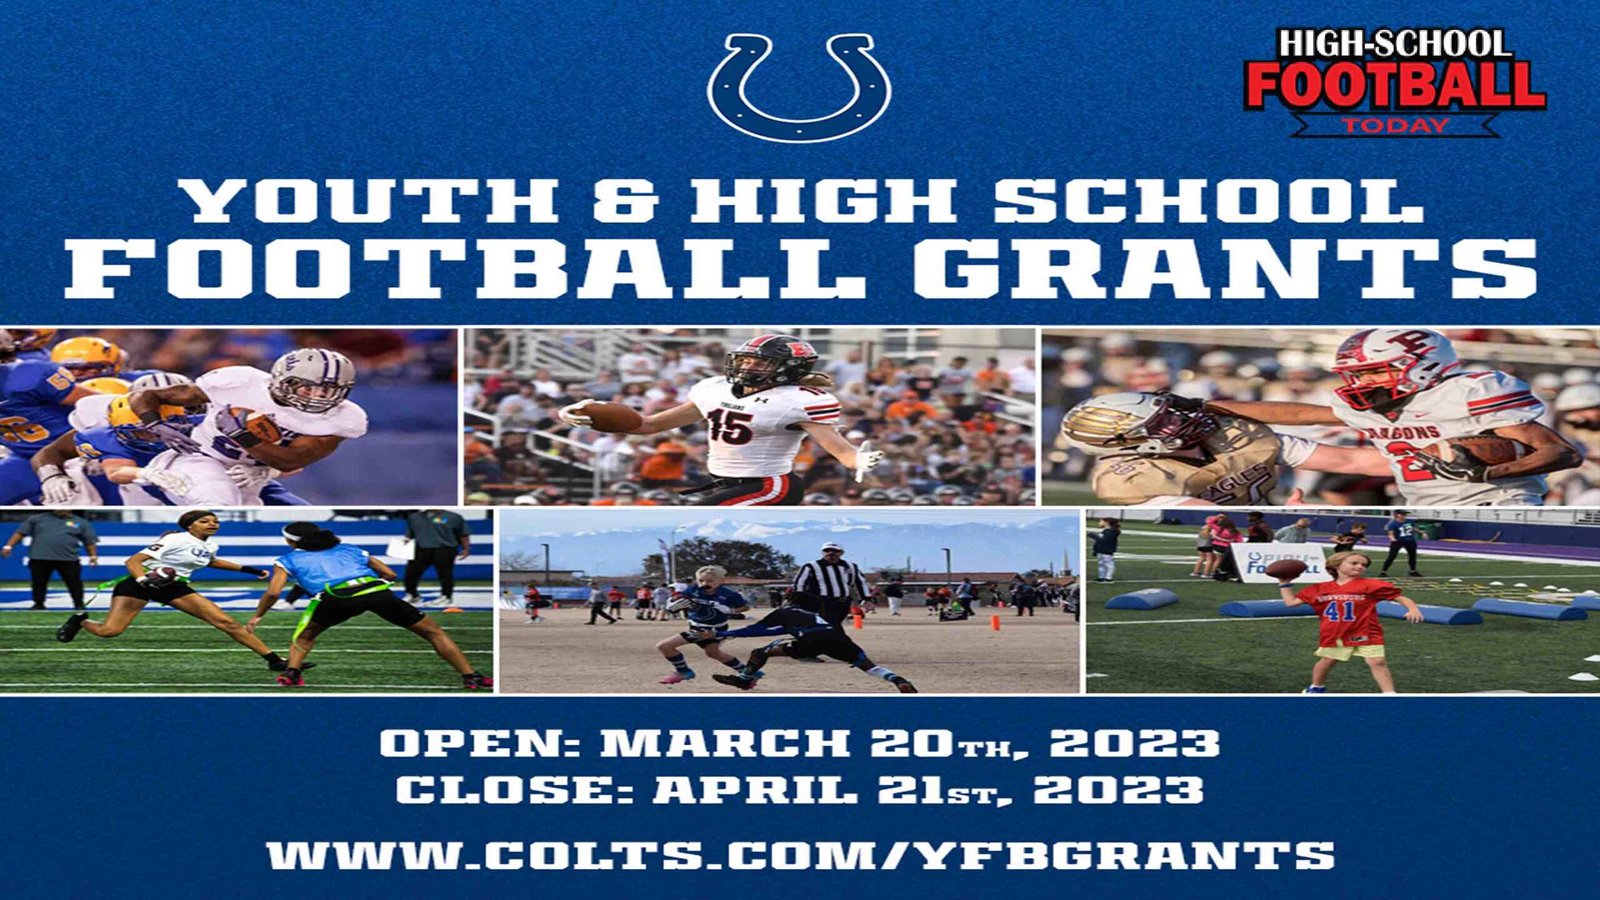 Apply Online for Grants in Colts Youth & High School Football Team